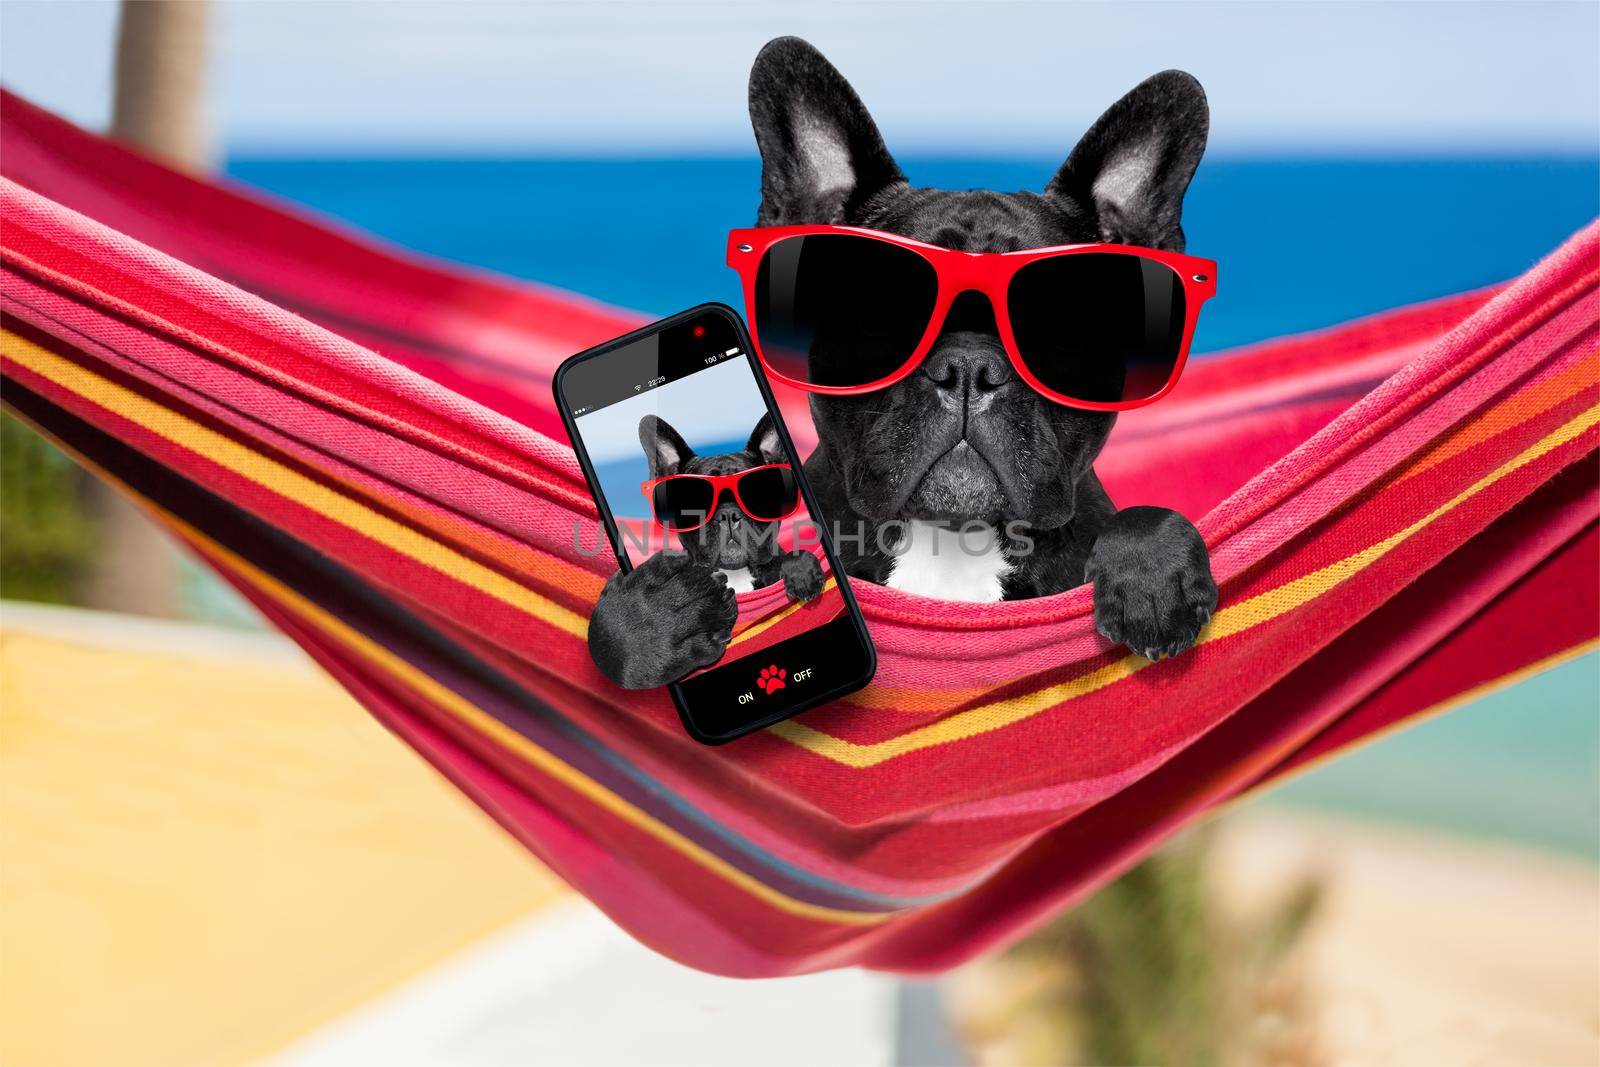 french  bulldog dog relaxing on a fancy red  hammock taking a selfie and sharing the fun with friends at the beach on summer vacation holidays